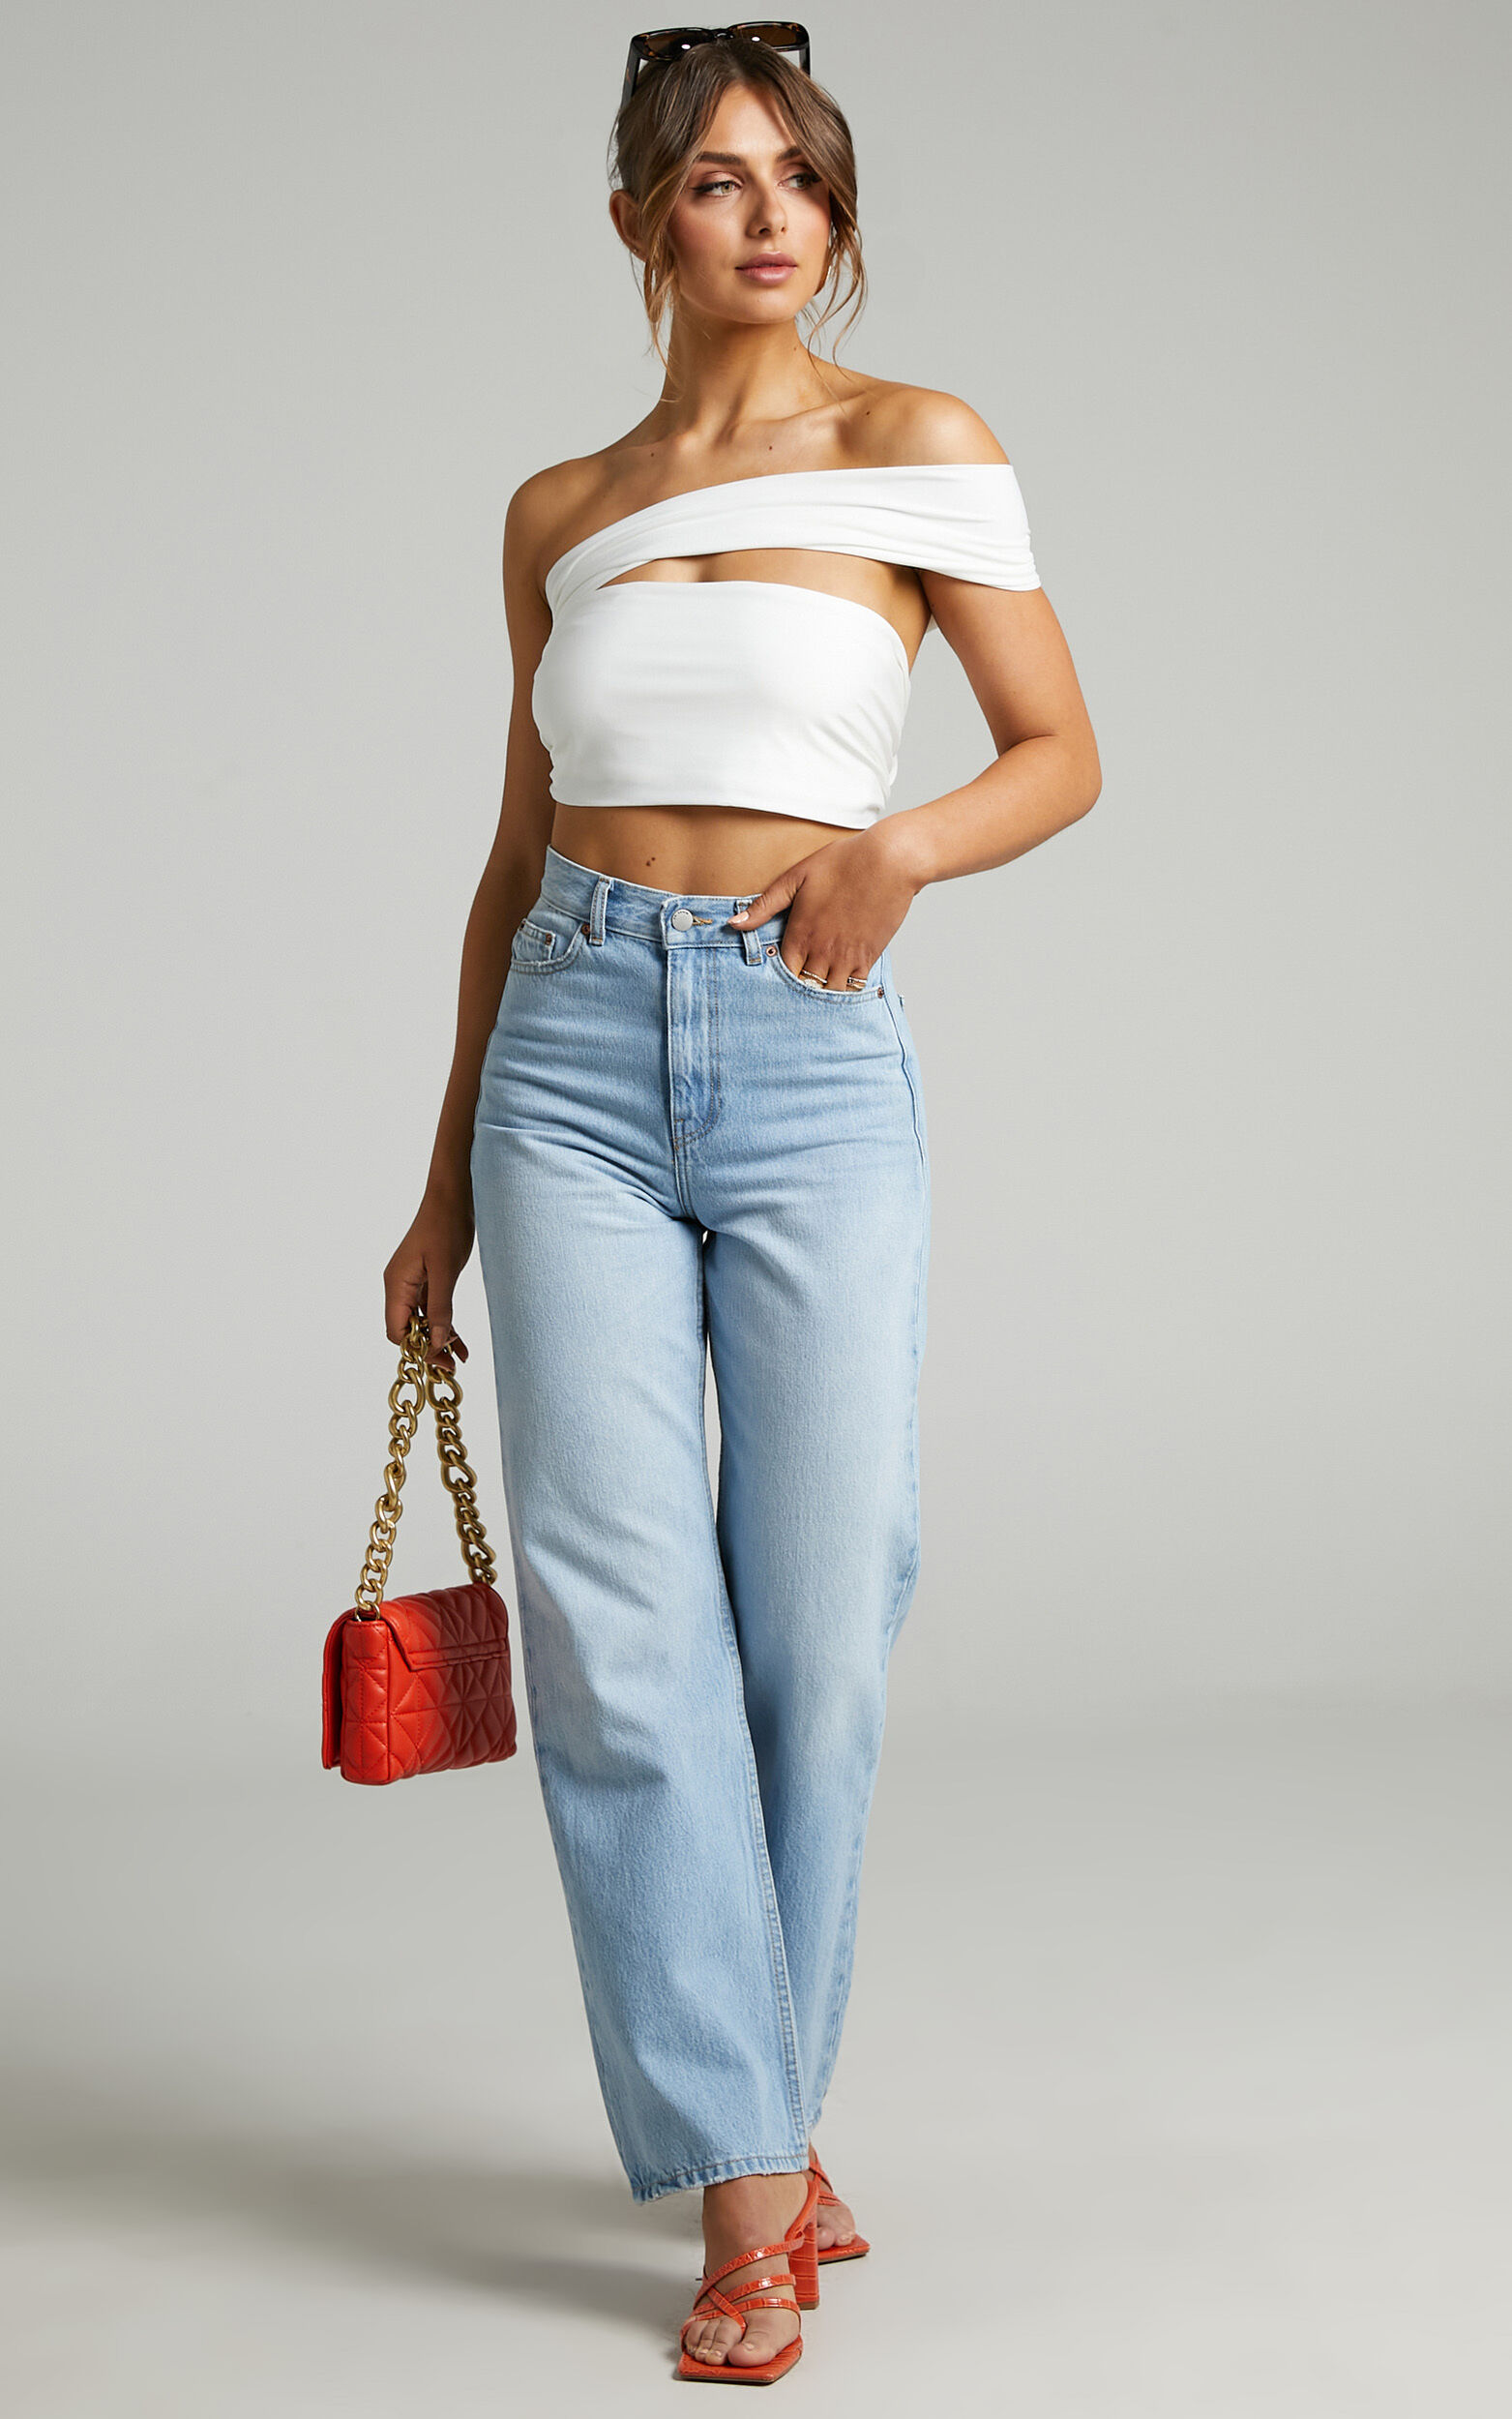 Lilah Multi Tie Crop Top in White - 06, WHT3, super-hi-res image number null